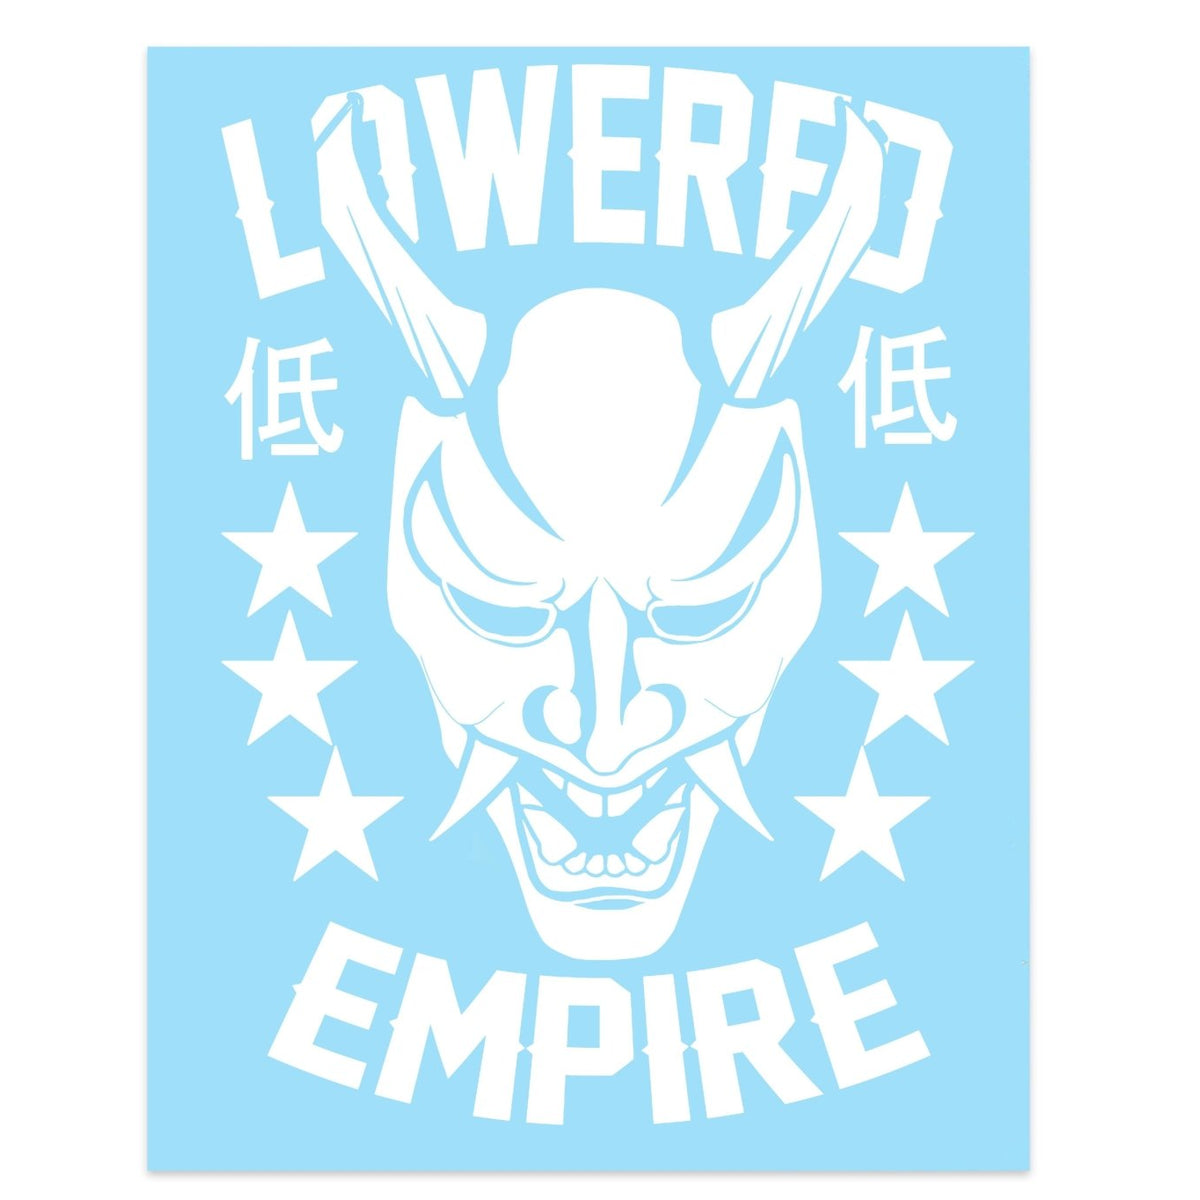 12" Lowered Empire Oni Mask Decal - Loweredempire